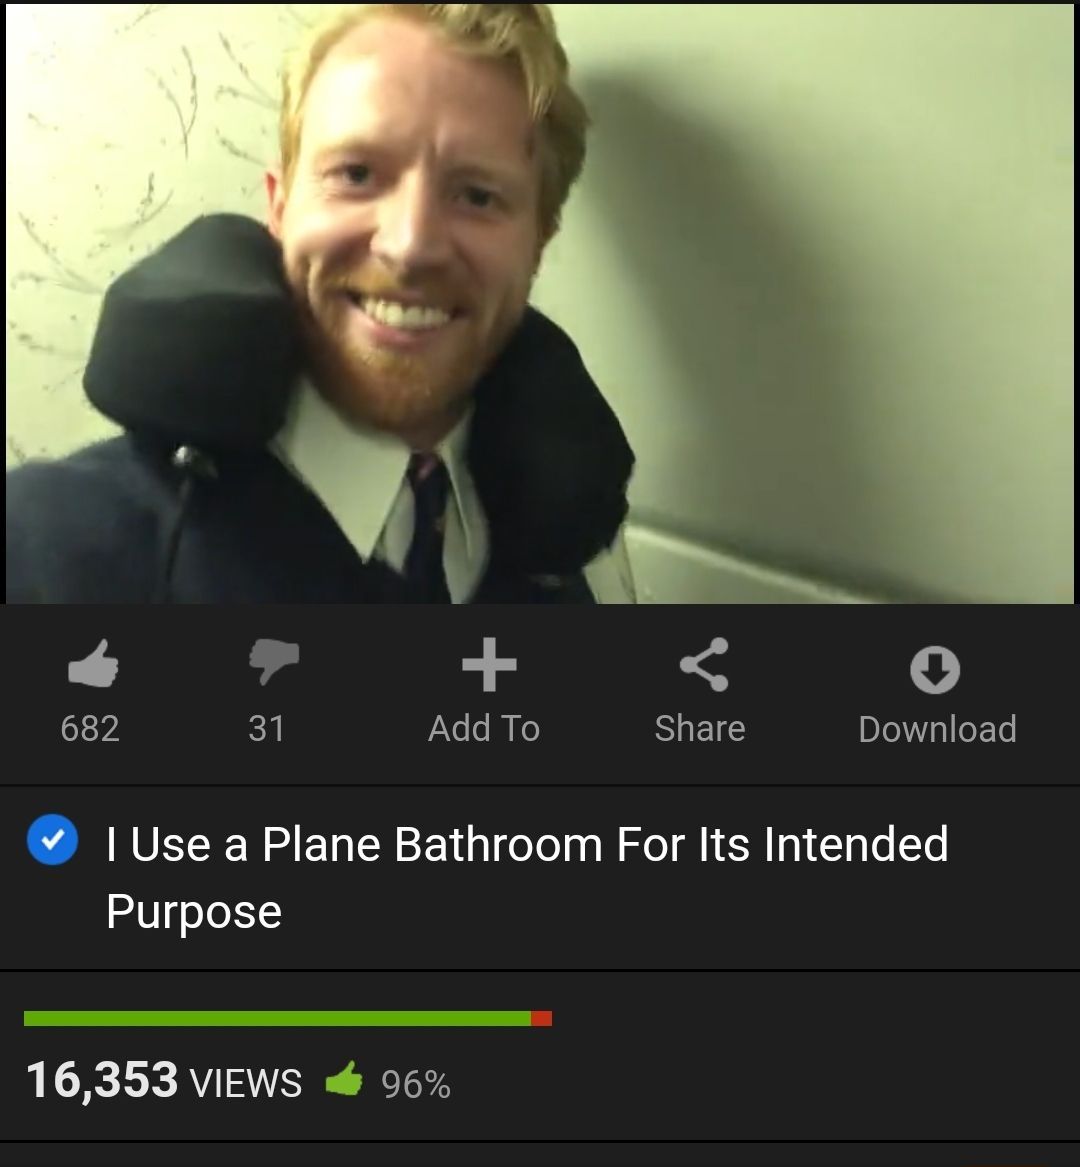 best of Plane for purpose intended bathroom its use